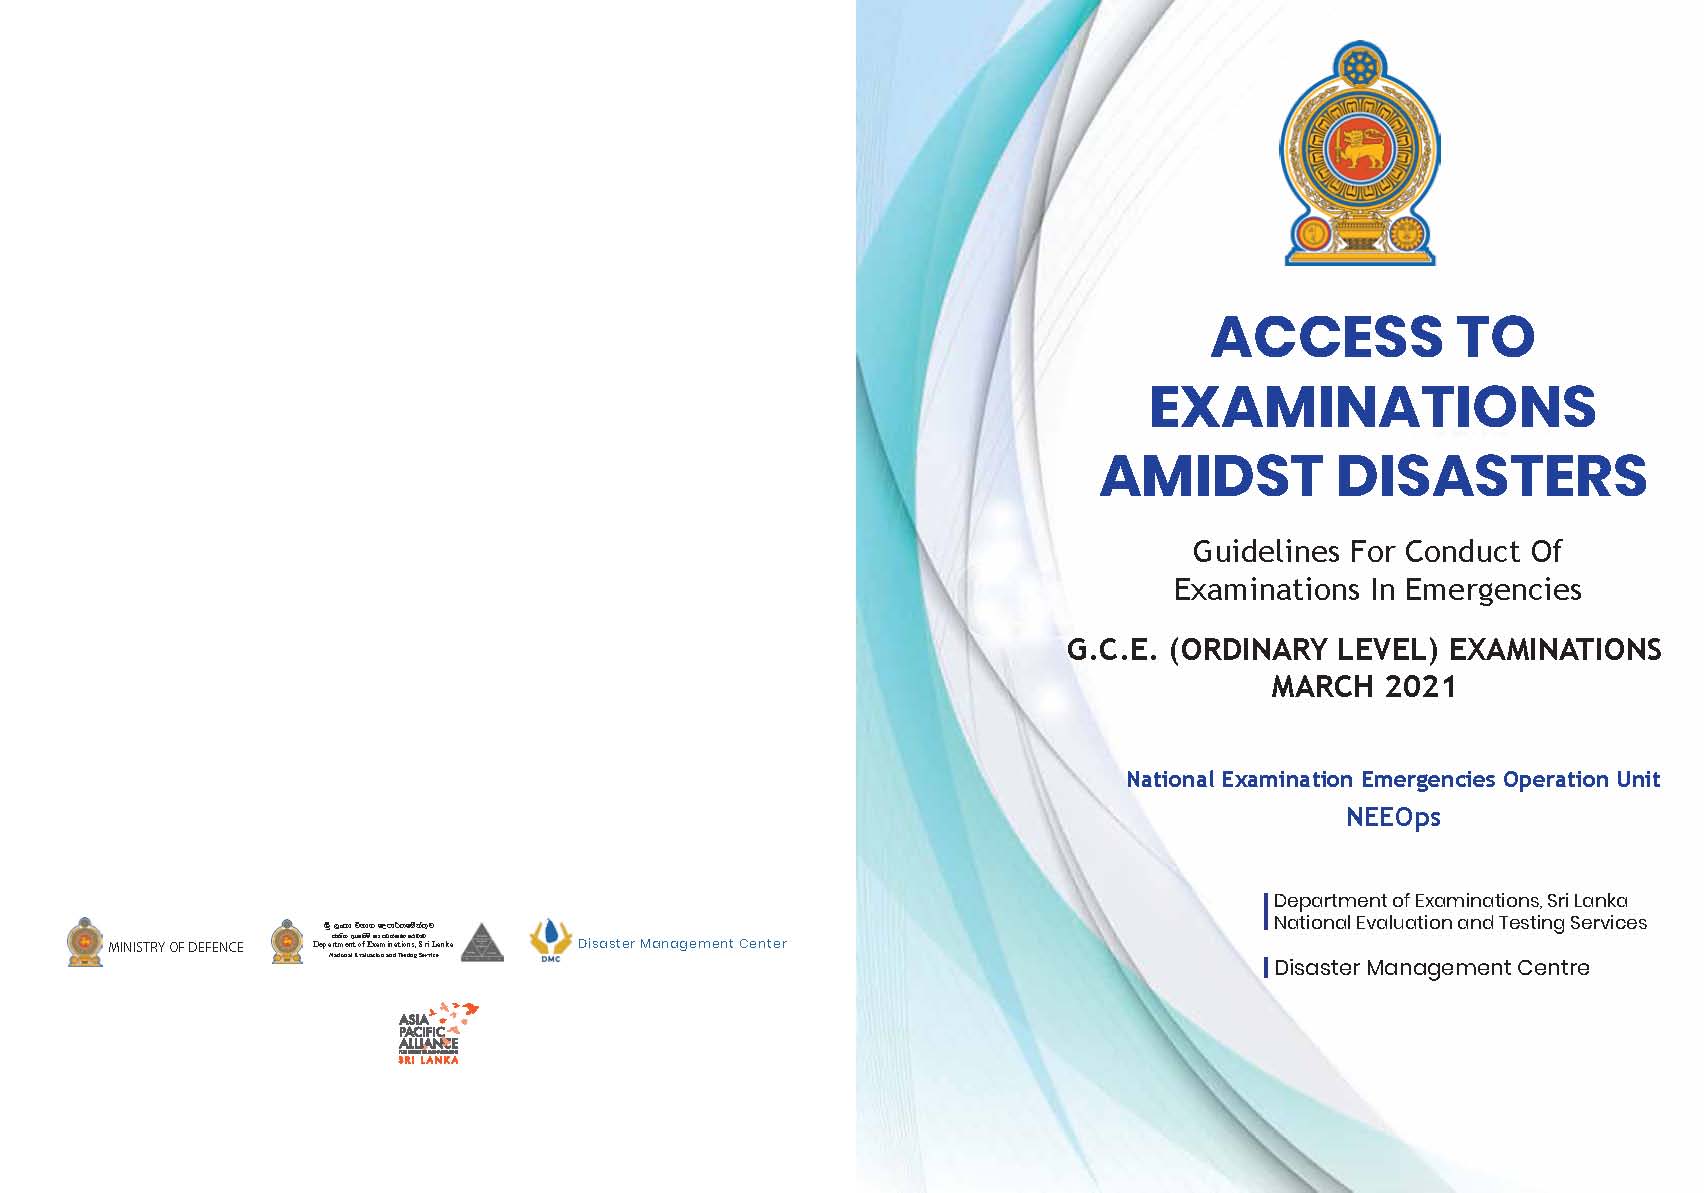 Preparing for G.C.E.  O/L Examinations amidst Disasters